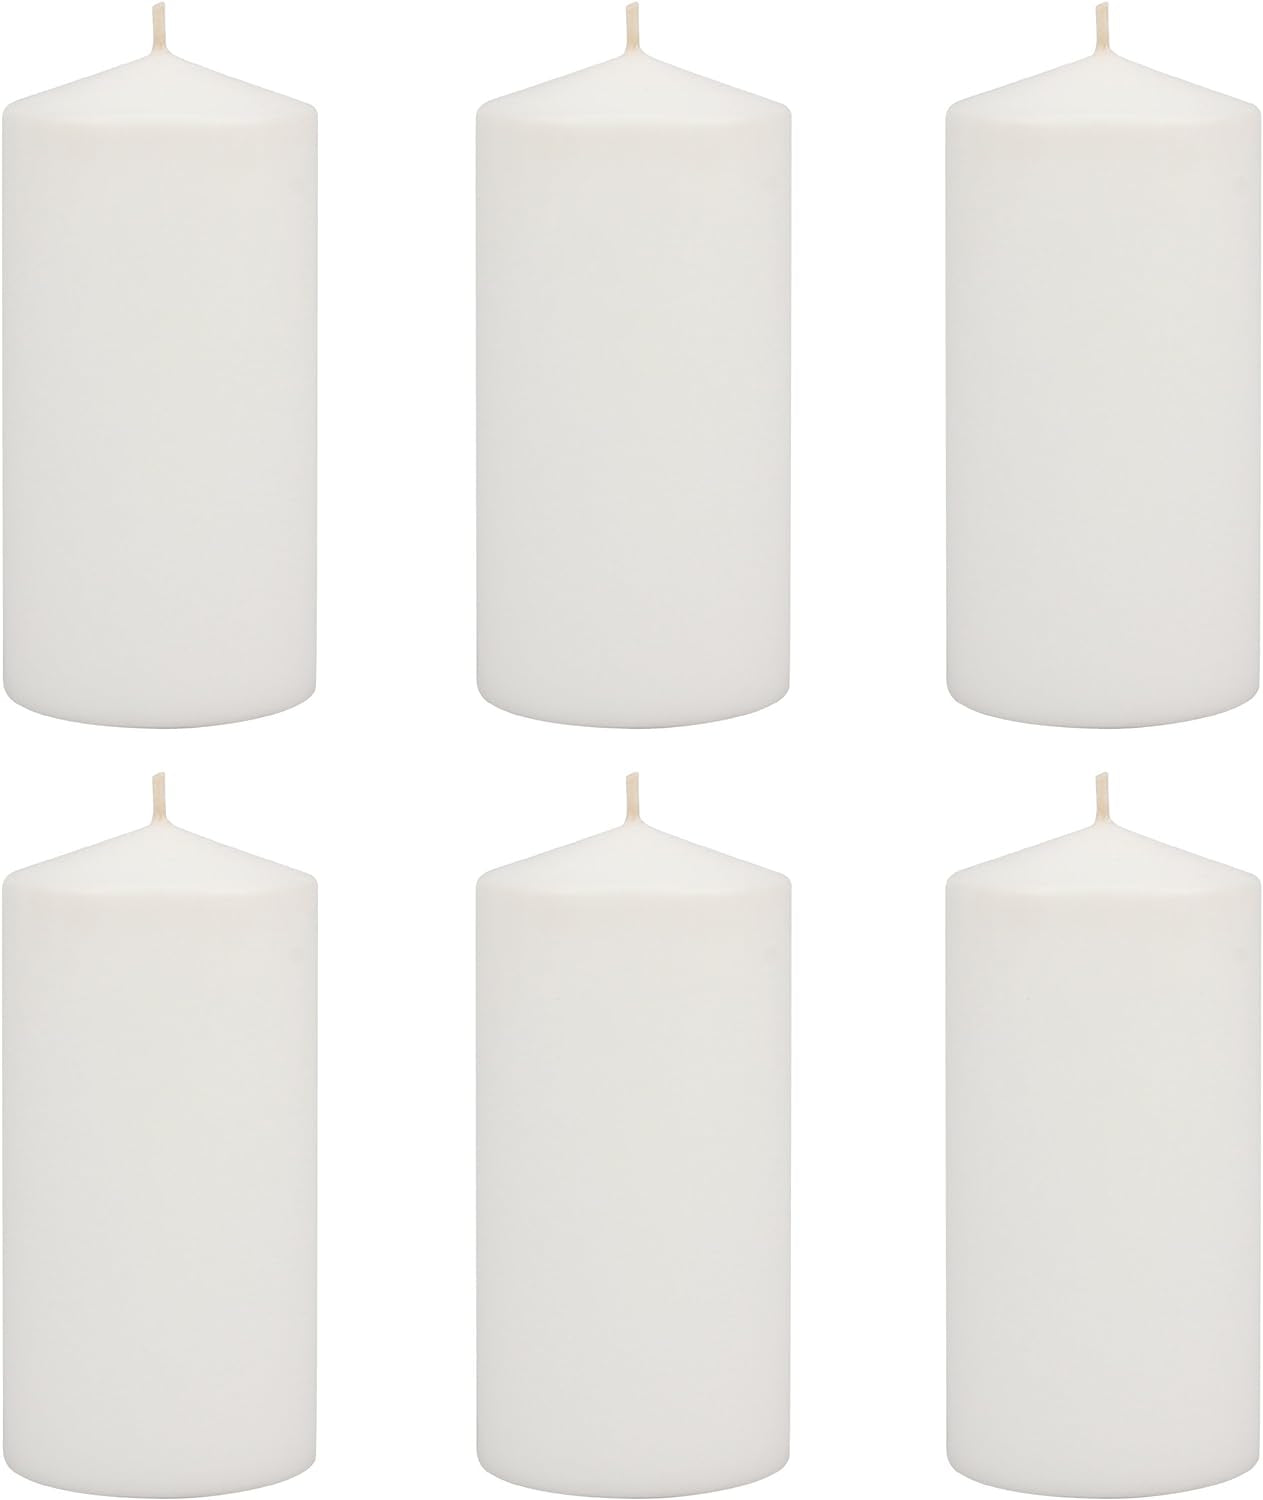 Tall 3X6 Inch Unscented Pillar Candles,White, 6 Count